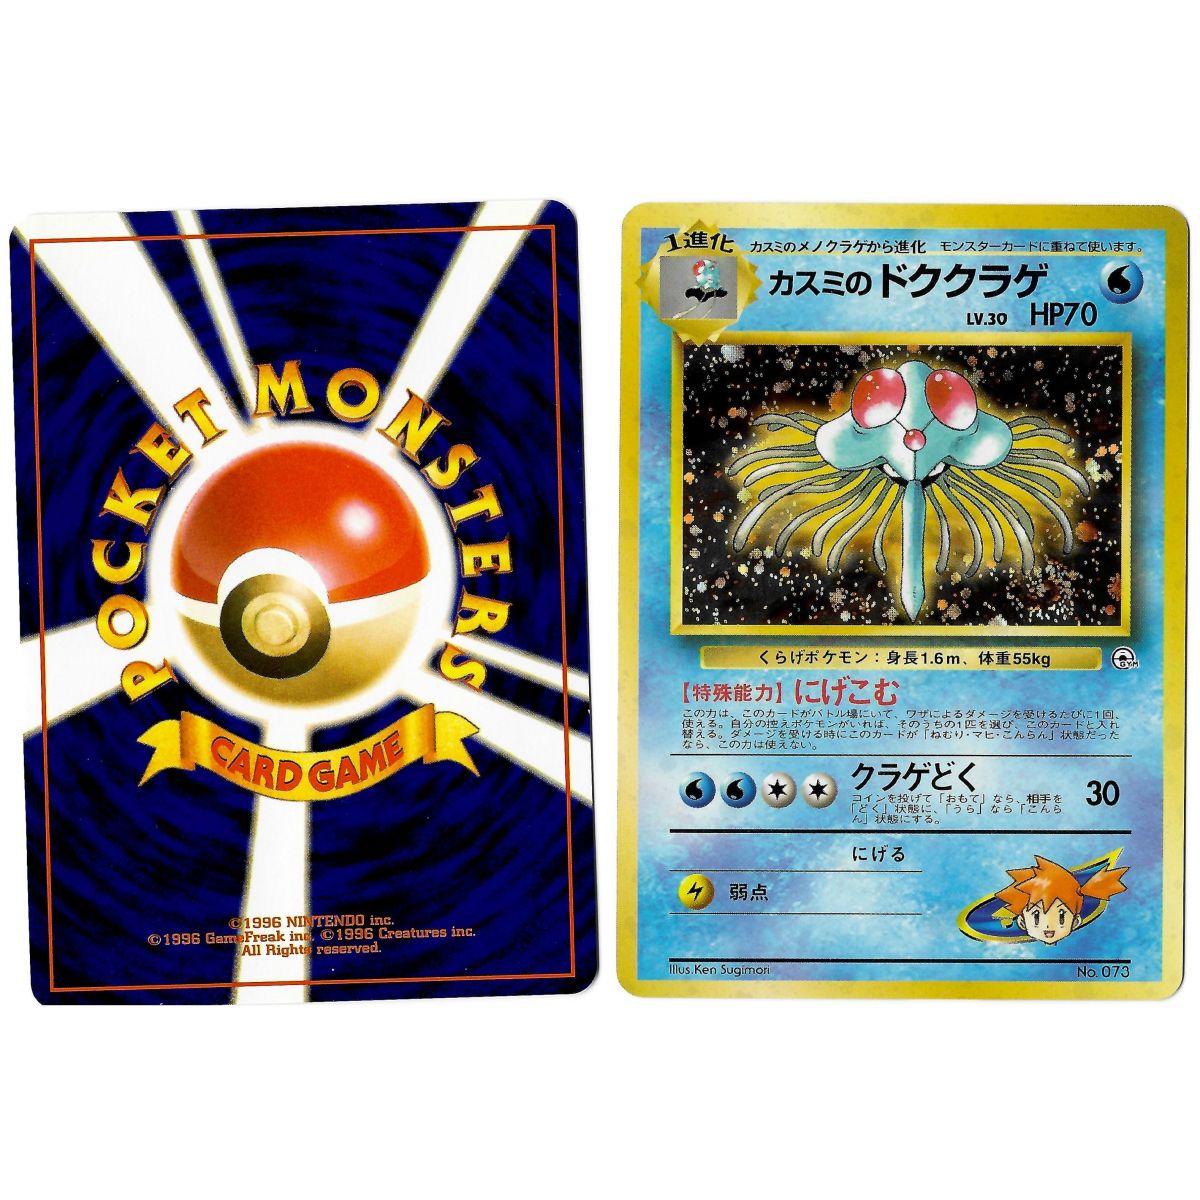 Misty's Tentacruel (1) No.073 Leaders' Stadium G1 Holo Unlimited Japanese View Scan